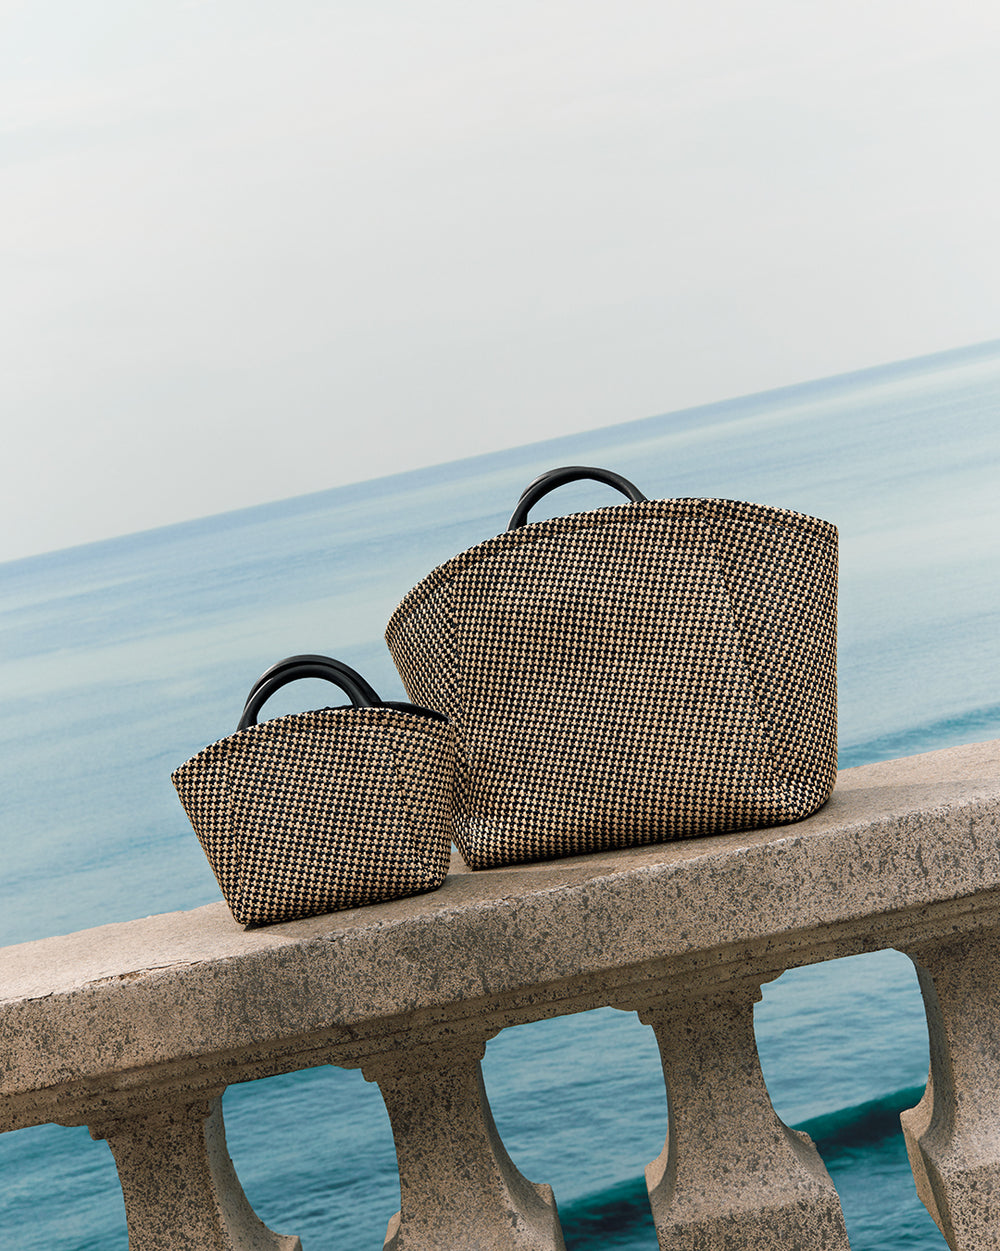 Two handbags on a stone railing overlooking the sea.